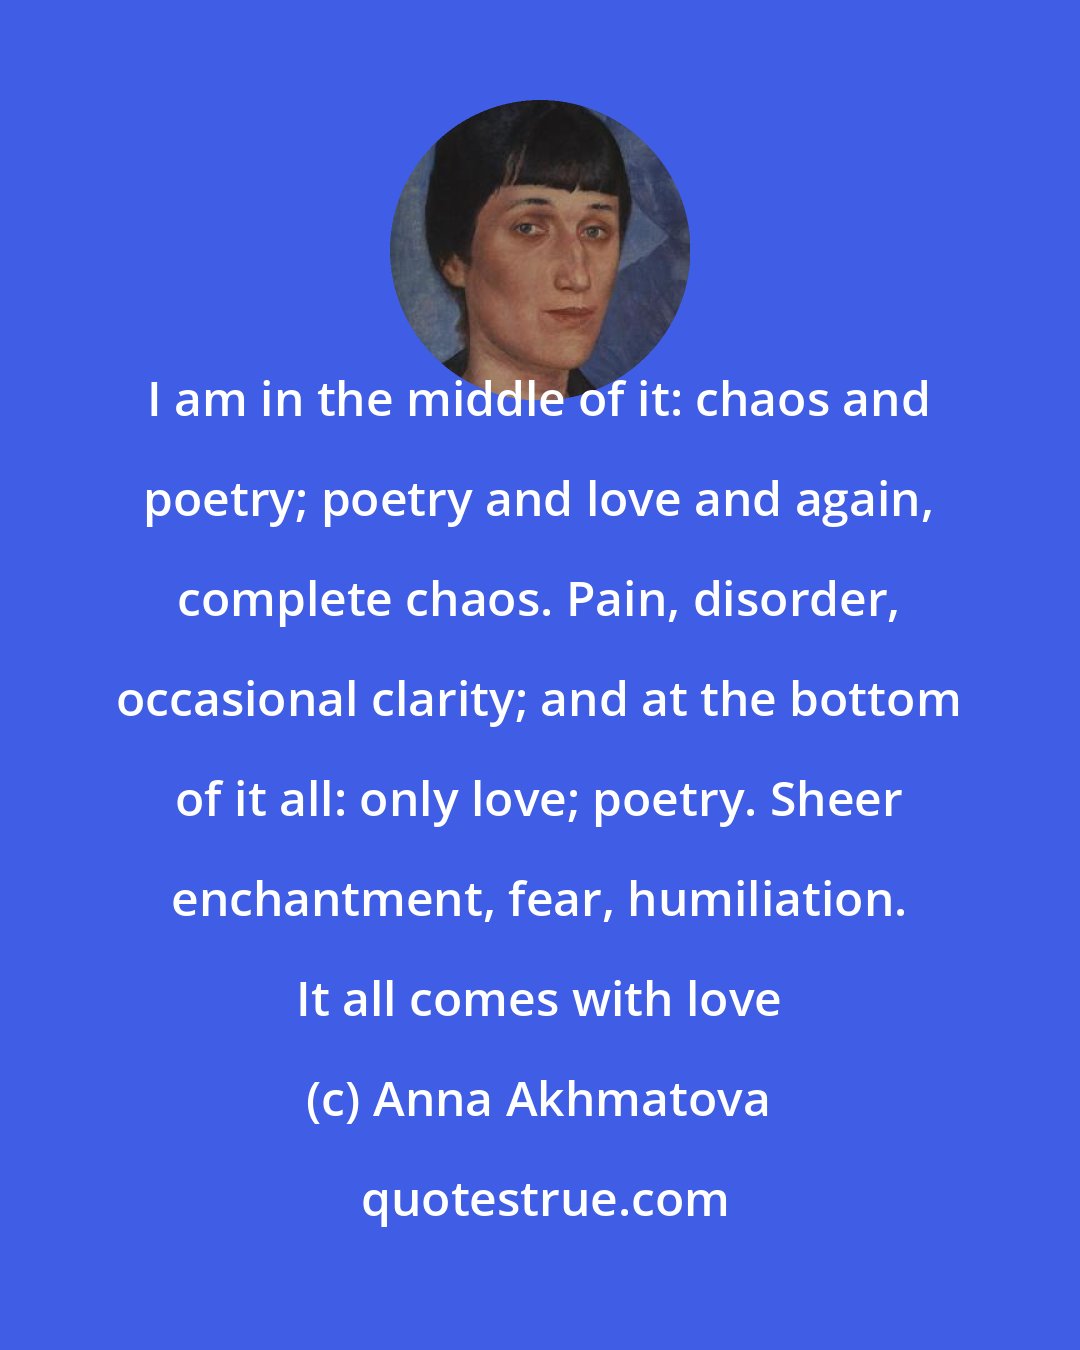 Anna Akhmatova: I am in the middle of it: chaos and poetry; poetry and love and again, complete chaos. Pain, disorder, occasional clarity; and at the bottom of it all: only love; poetry. Sheer enchantment, fear, humiliation. It all comes with love